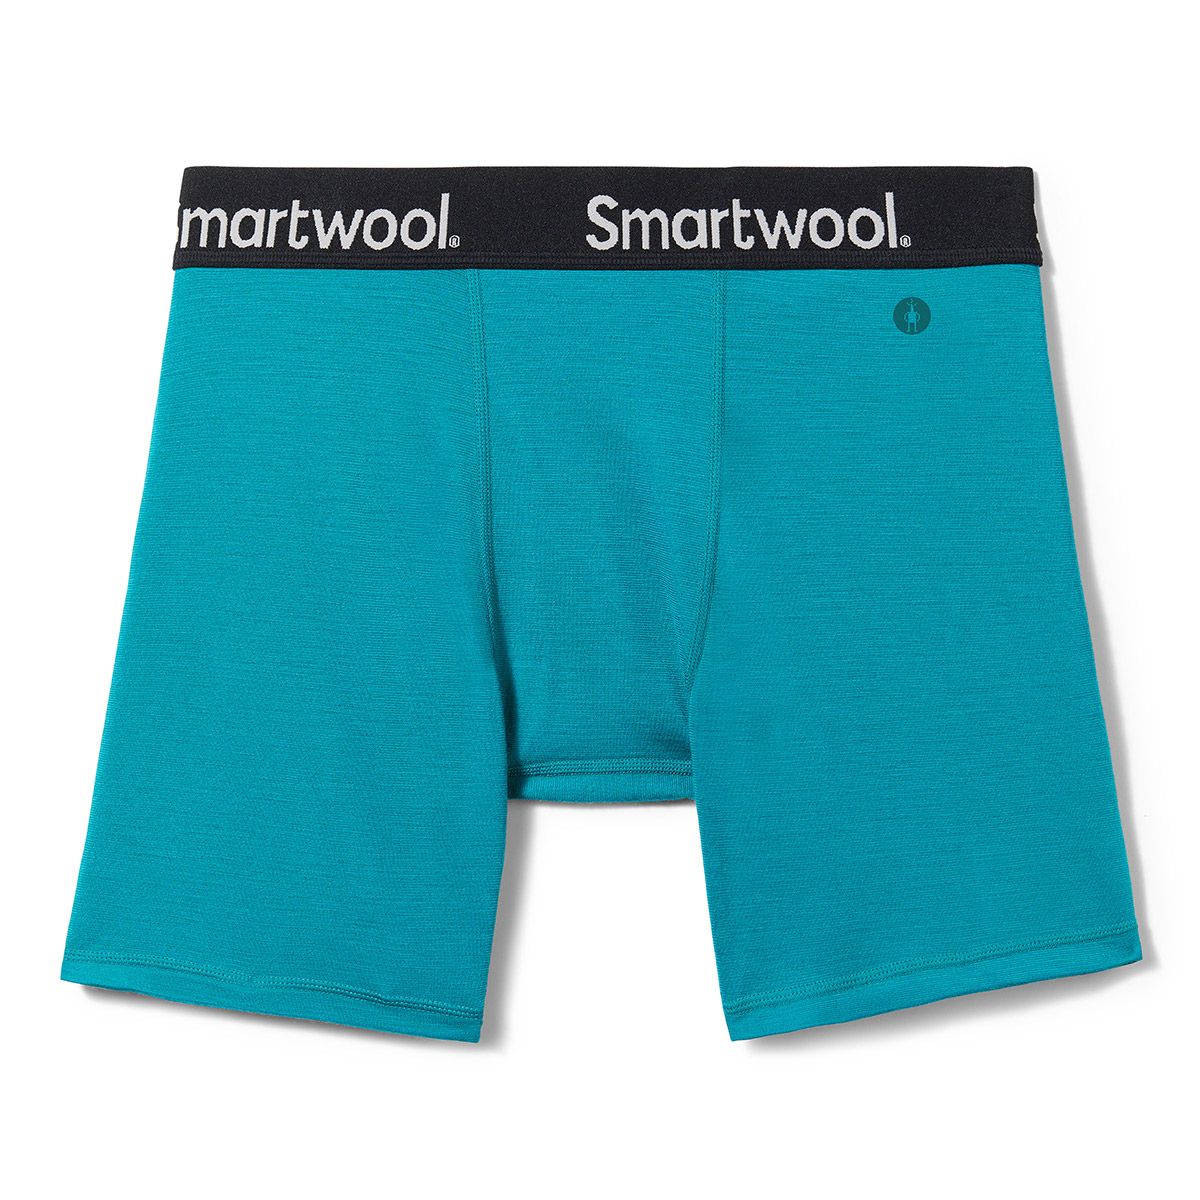 Smartwool Mens Active Boxer Brief Boxed